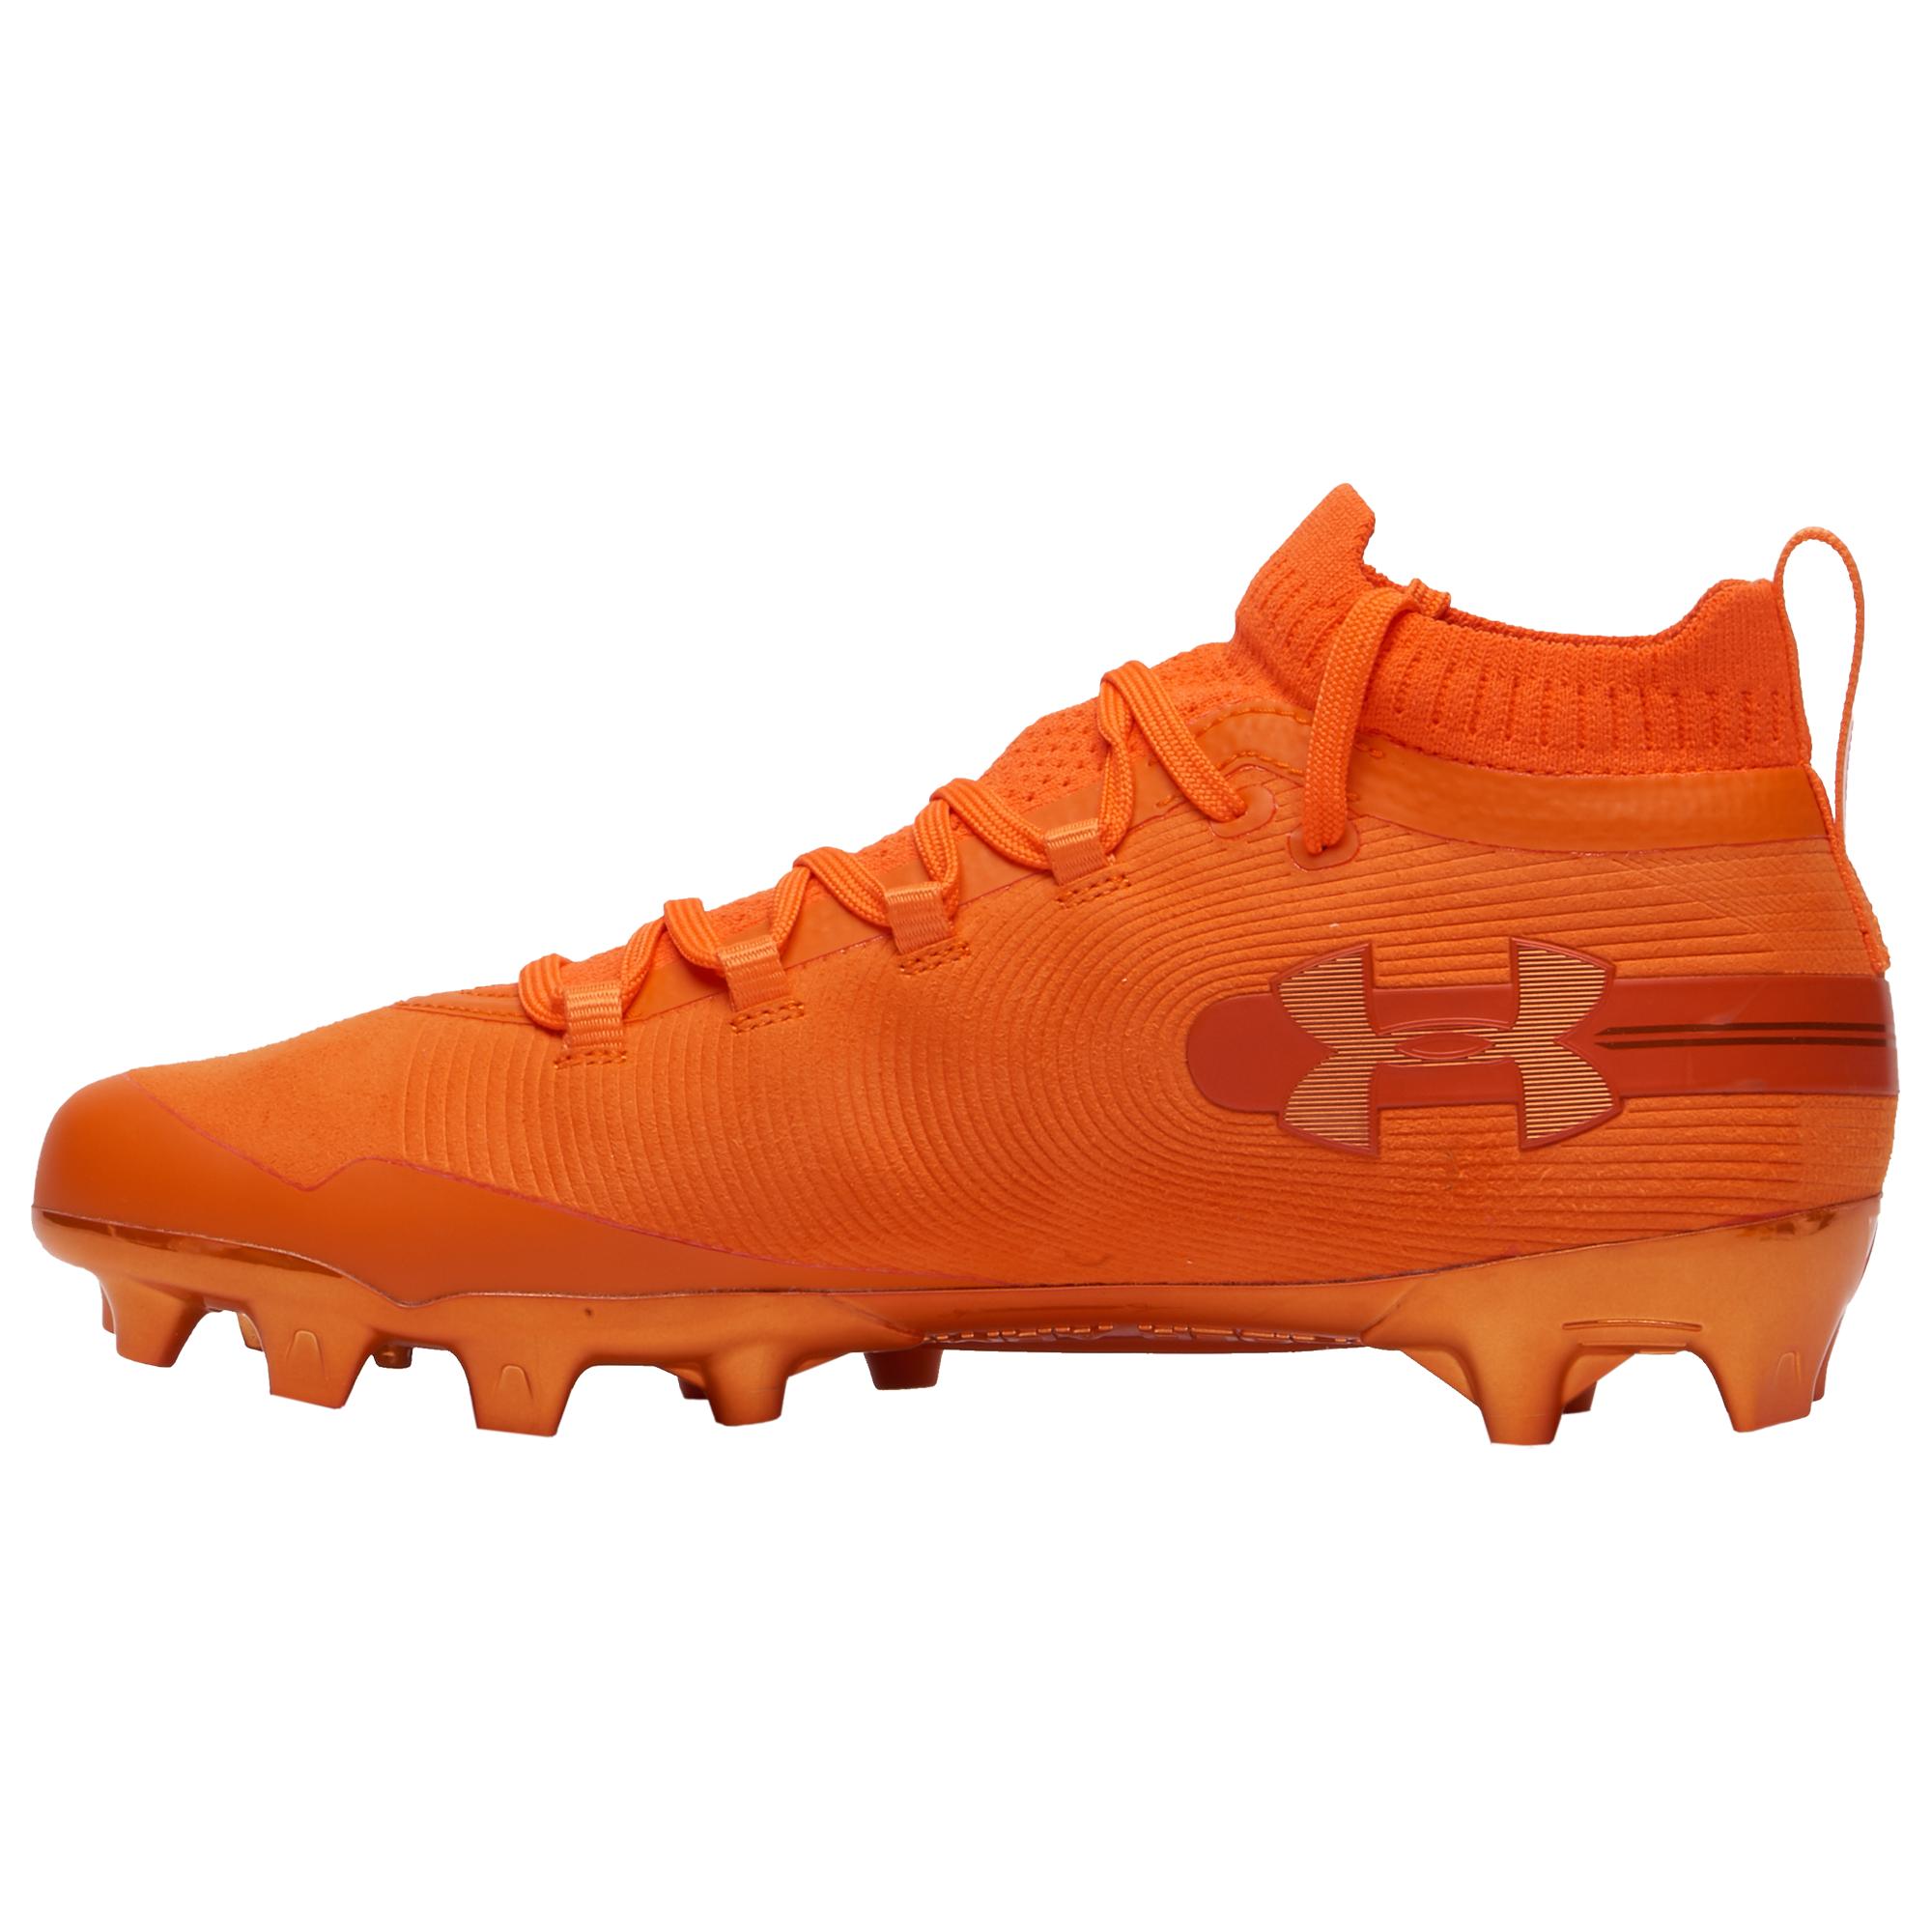 Under Armour Spotlight Mc Suede Molded Cleats Shoes in